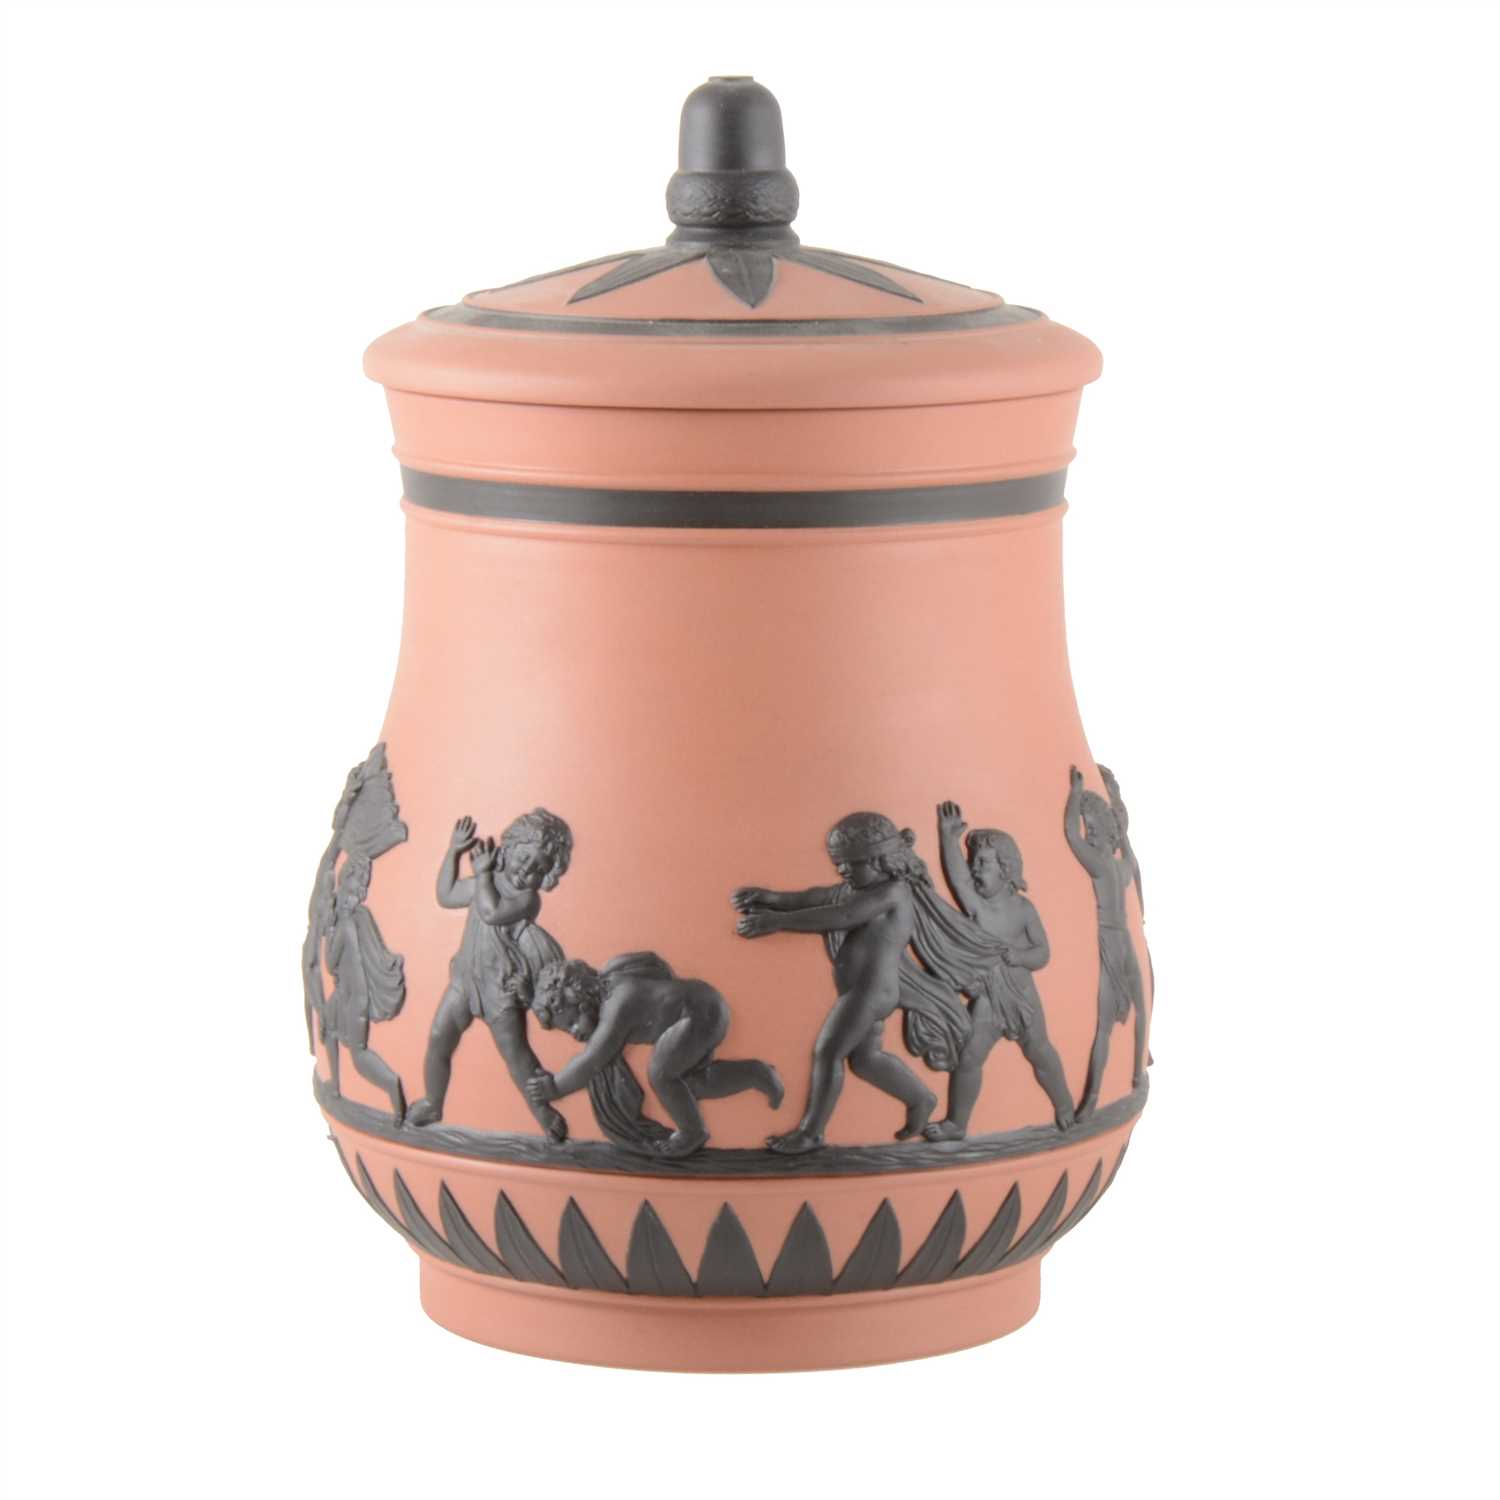 Lot 29 - A Jasperware vase and cover, 'Cherubs at Play', by Wedgwood.